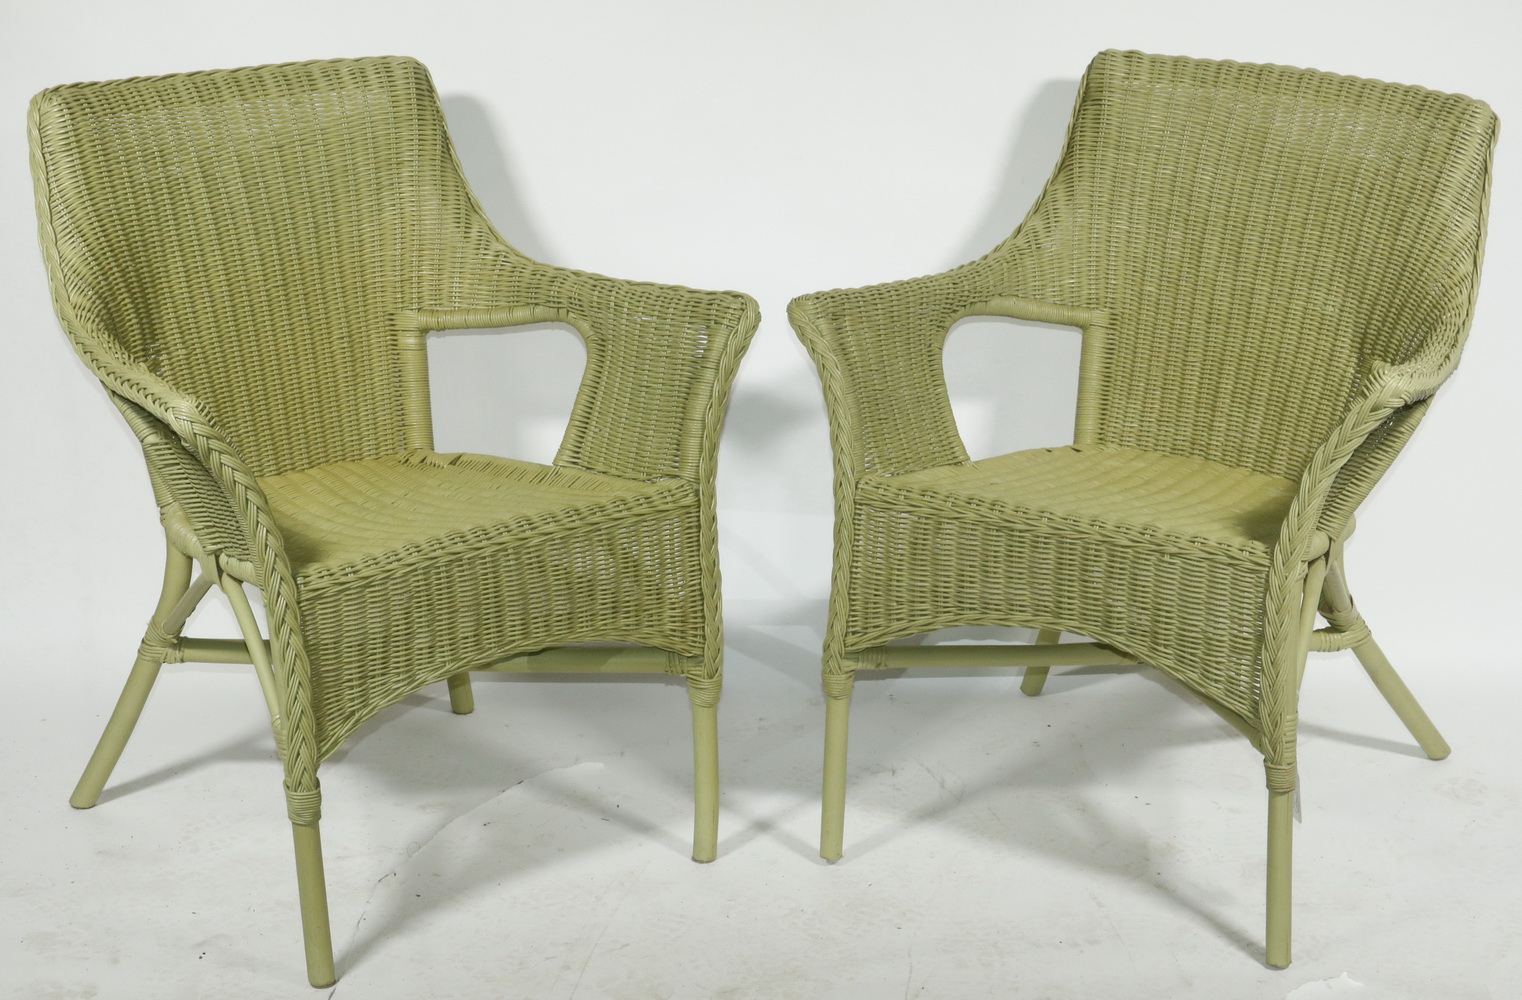  2 NATURAL WICKER ARM CHAIRS 2  2b502a